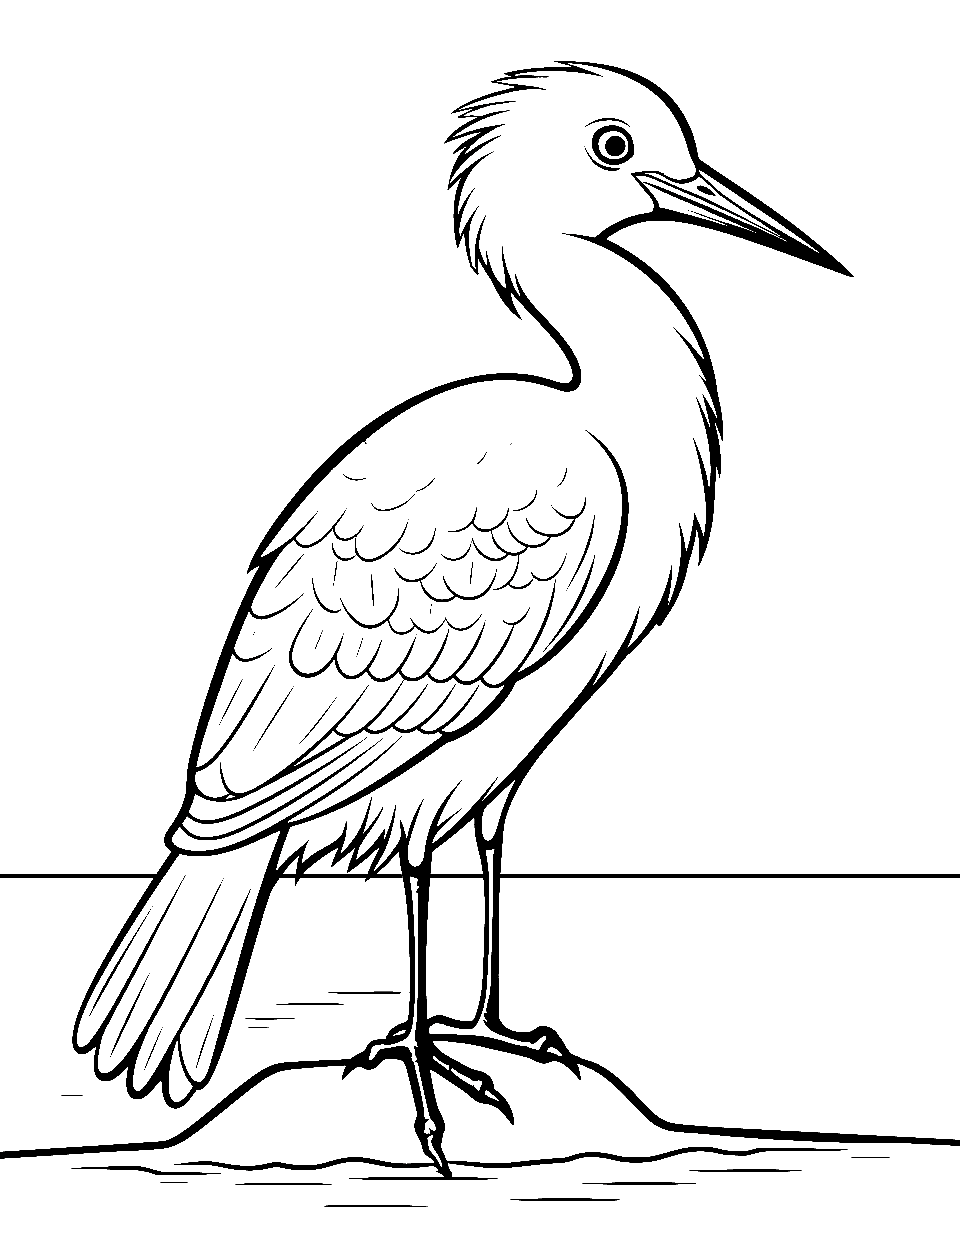 Graceful Crane Stand Coloring Page - A crane standing tall by a serene pond.